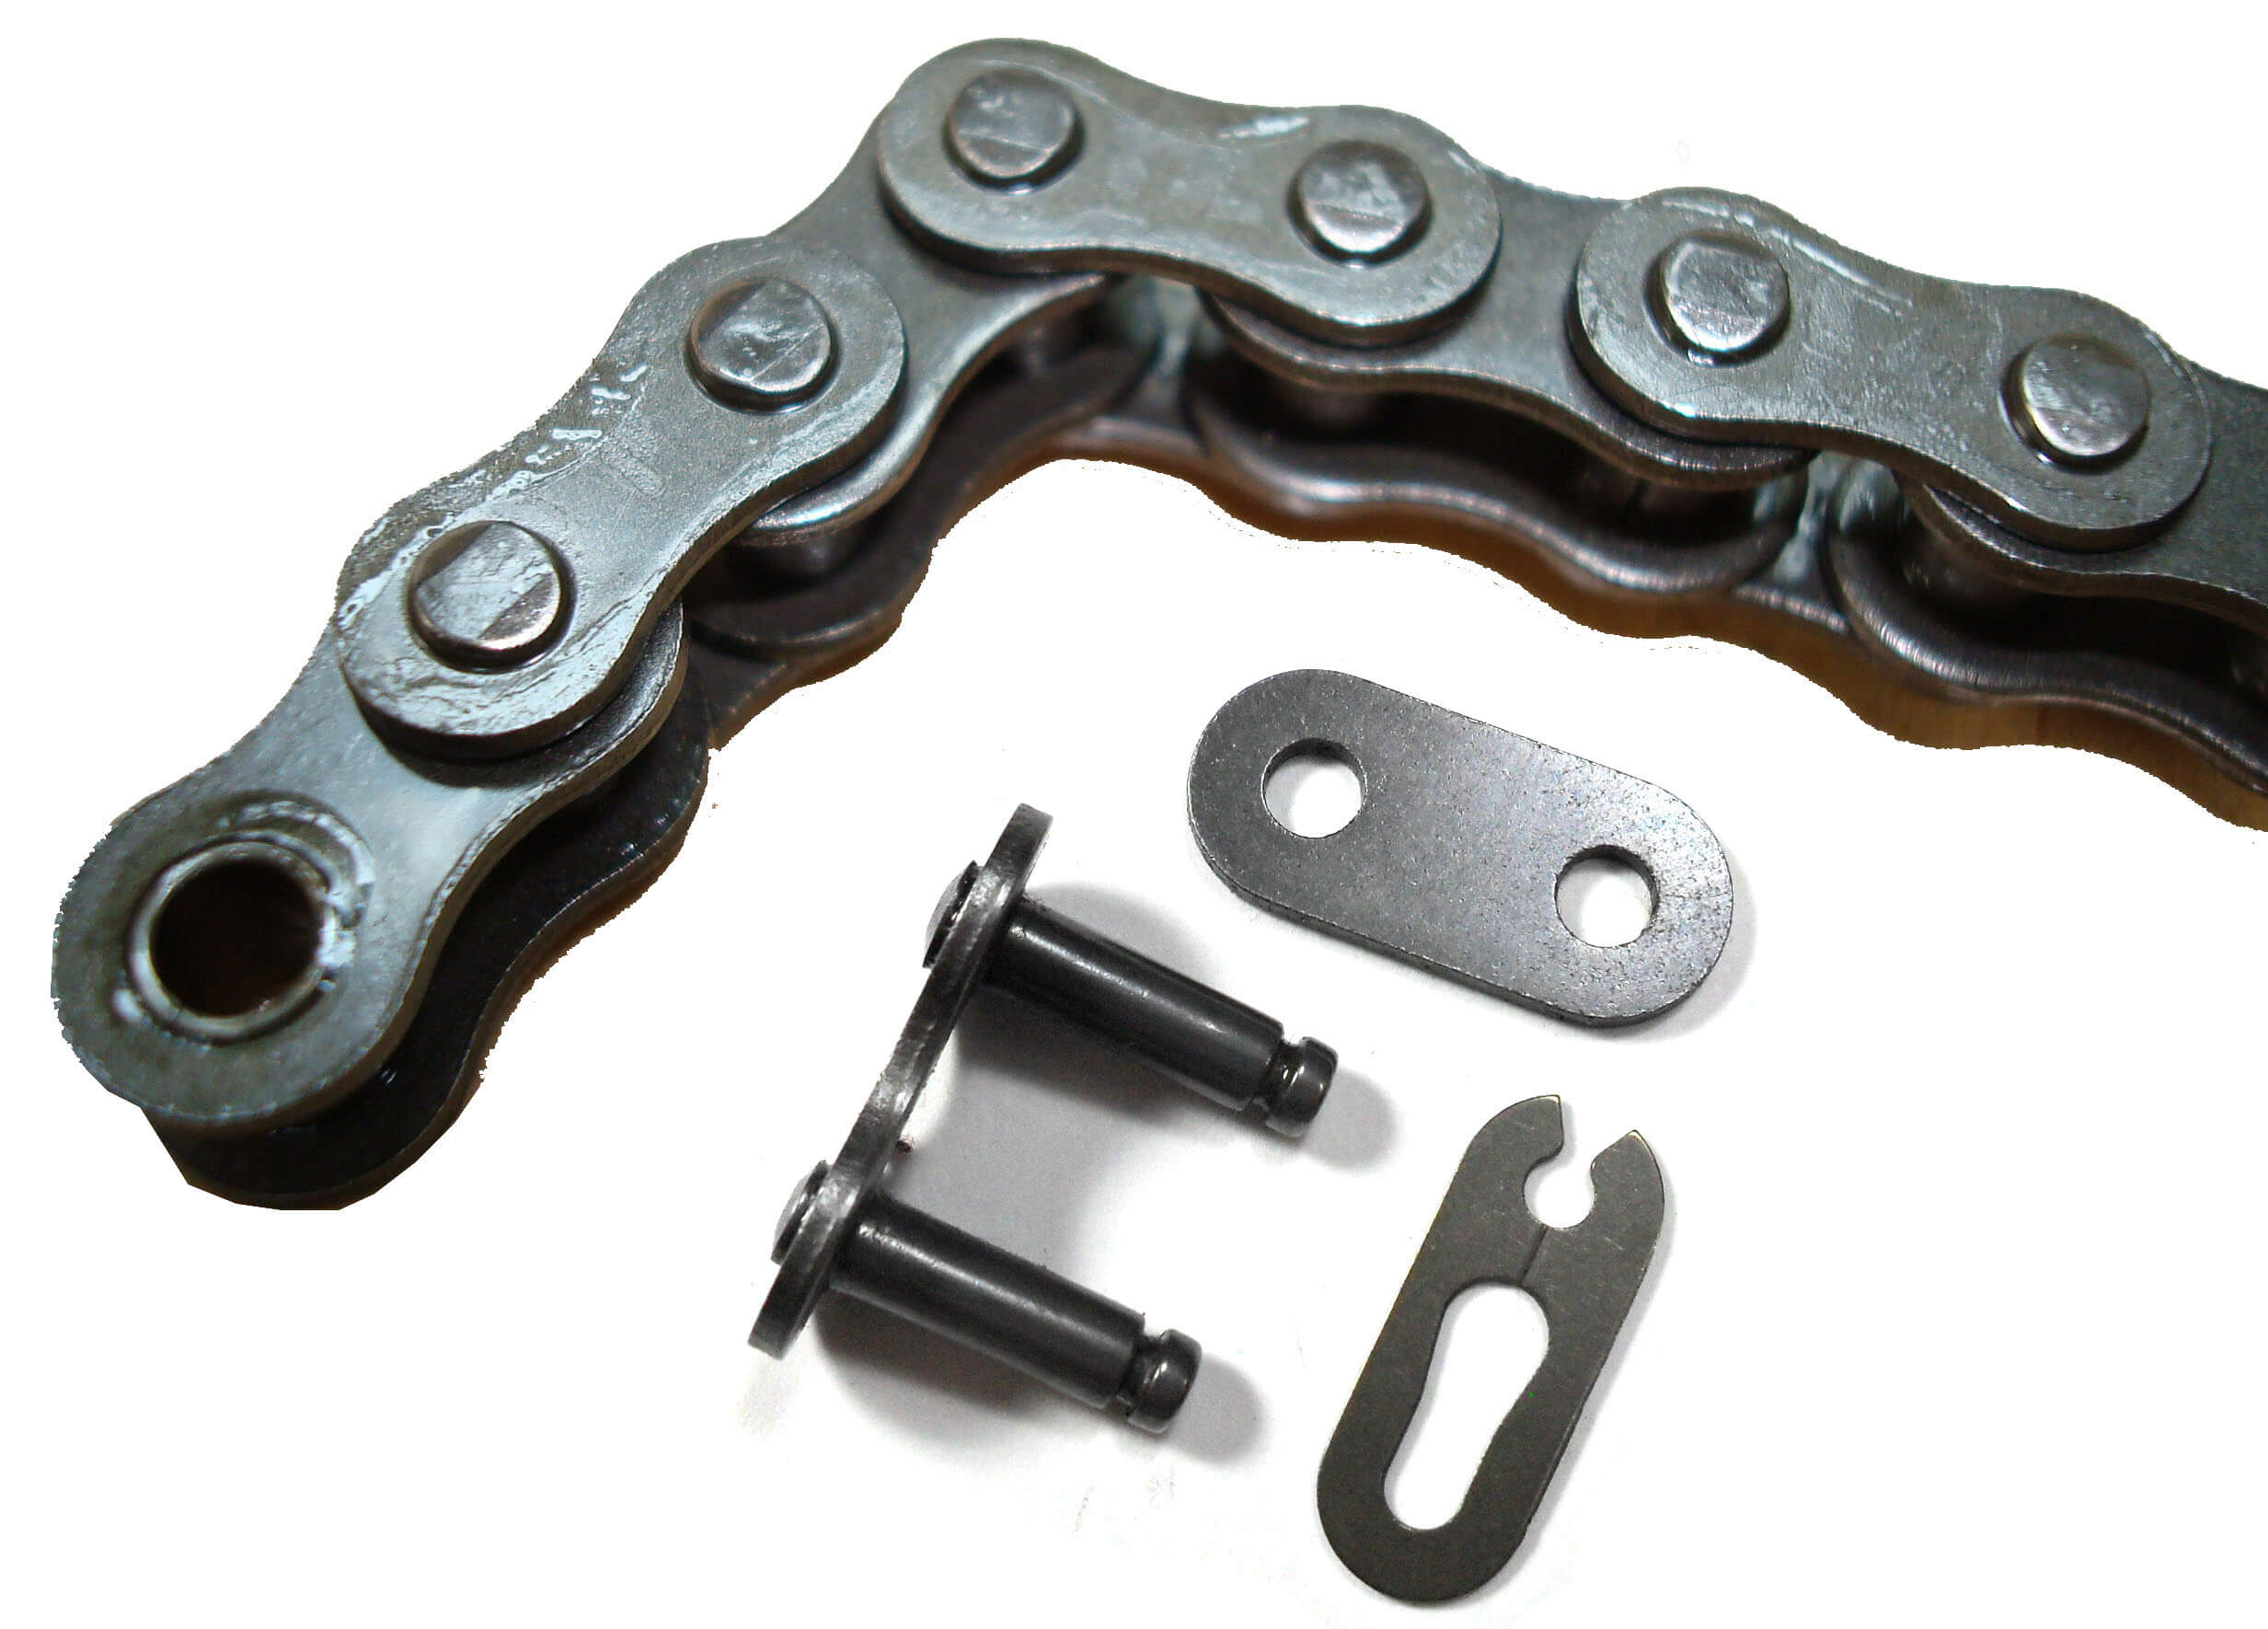 Chain #420 x 74L With Master Link Fits Tao Tao Boulder, B1, Coolster, 110-125cc ATVs + many more. - Click Image to Close